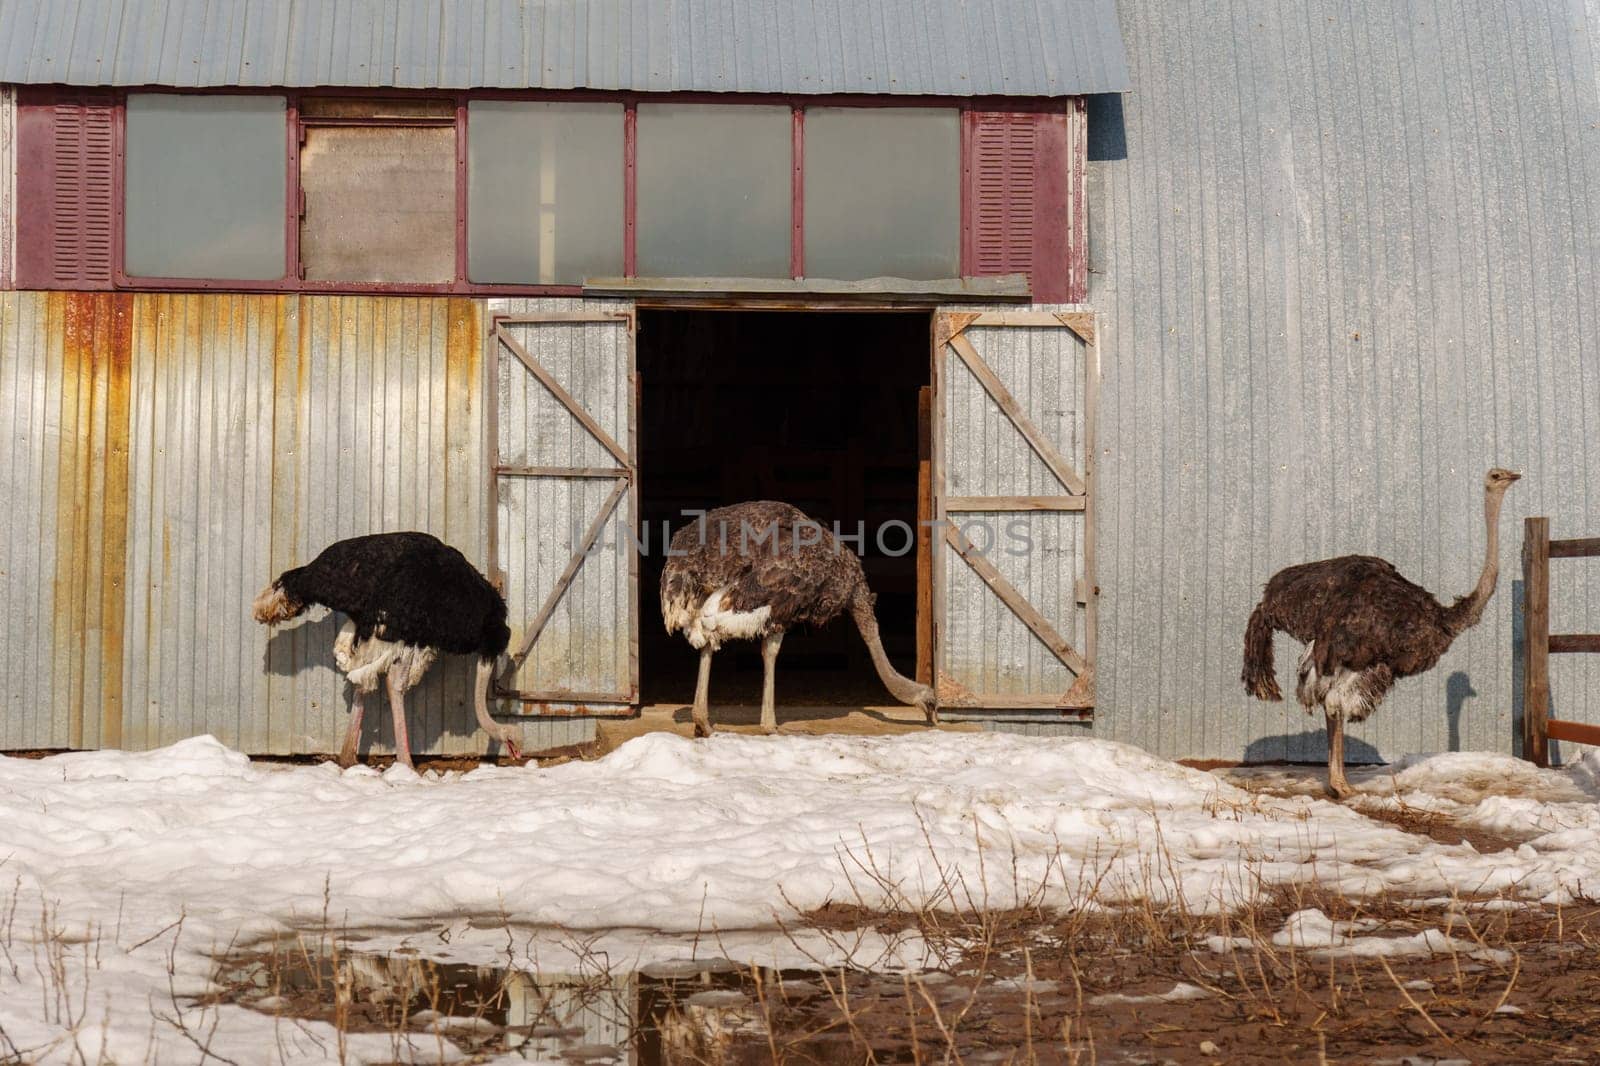 Ostrich is standing in a pen on an ostrich farm, with a barn visible in the background. by darksoul72